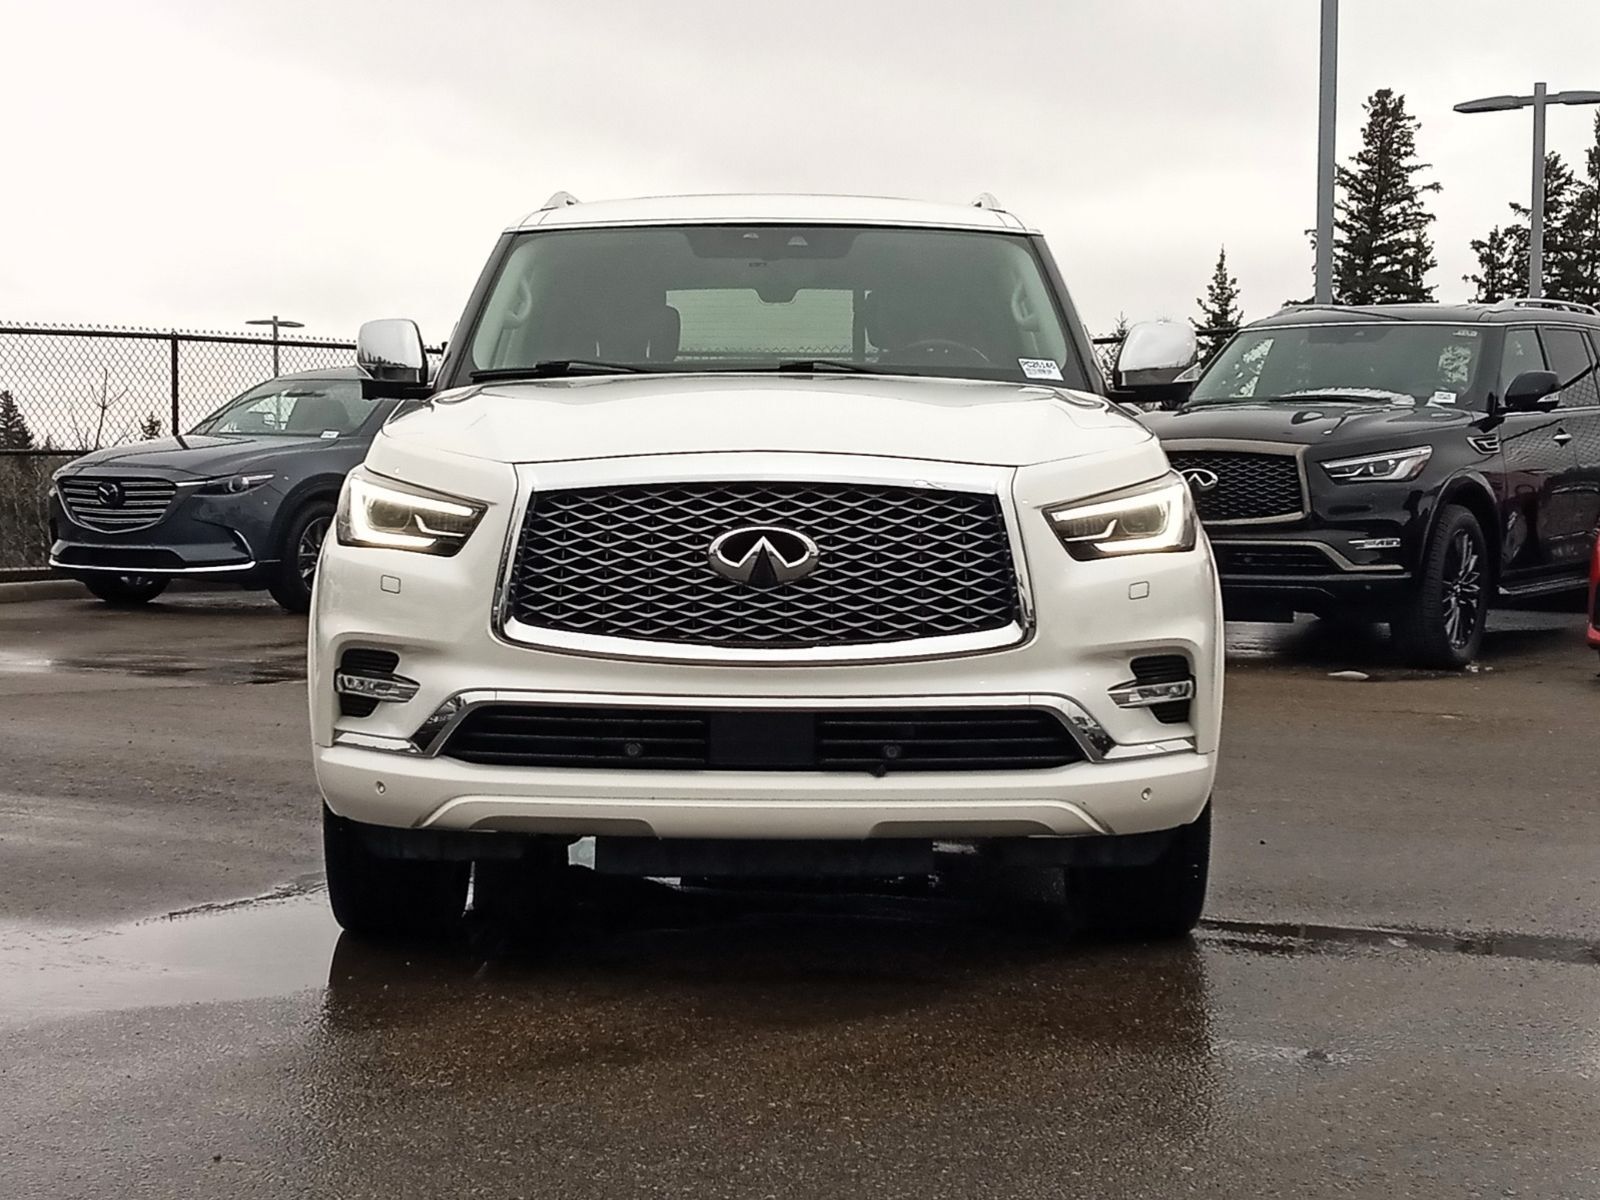 2019 Infiniti QX80 PROACTIVE, LEATHER, SUNROOF, DVD, CPO AVAIL